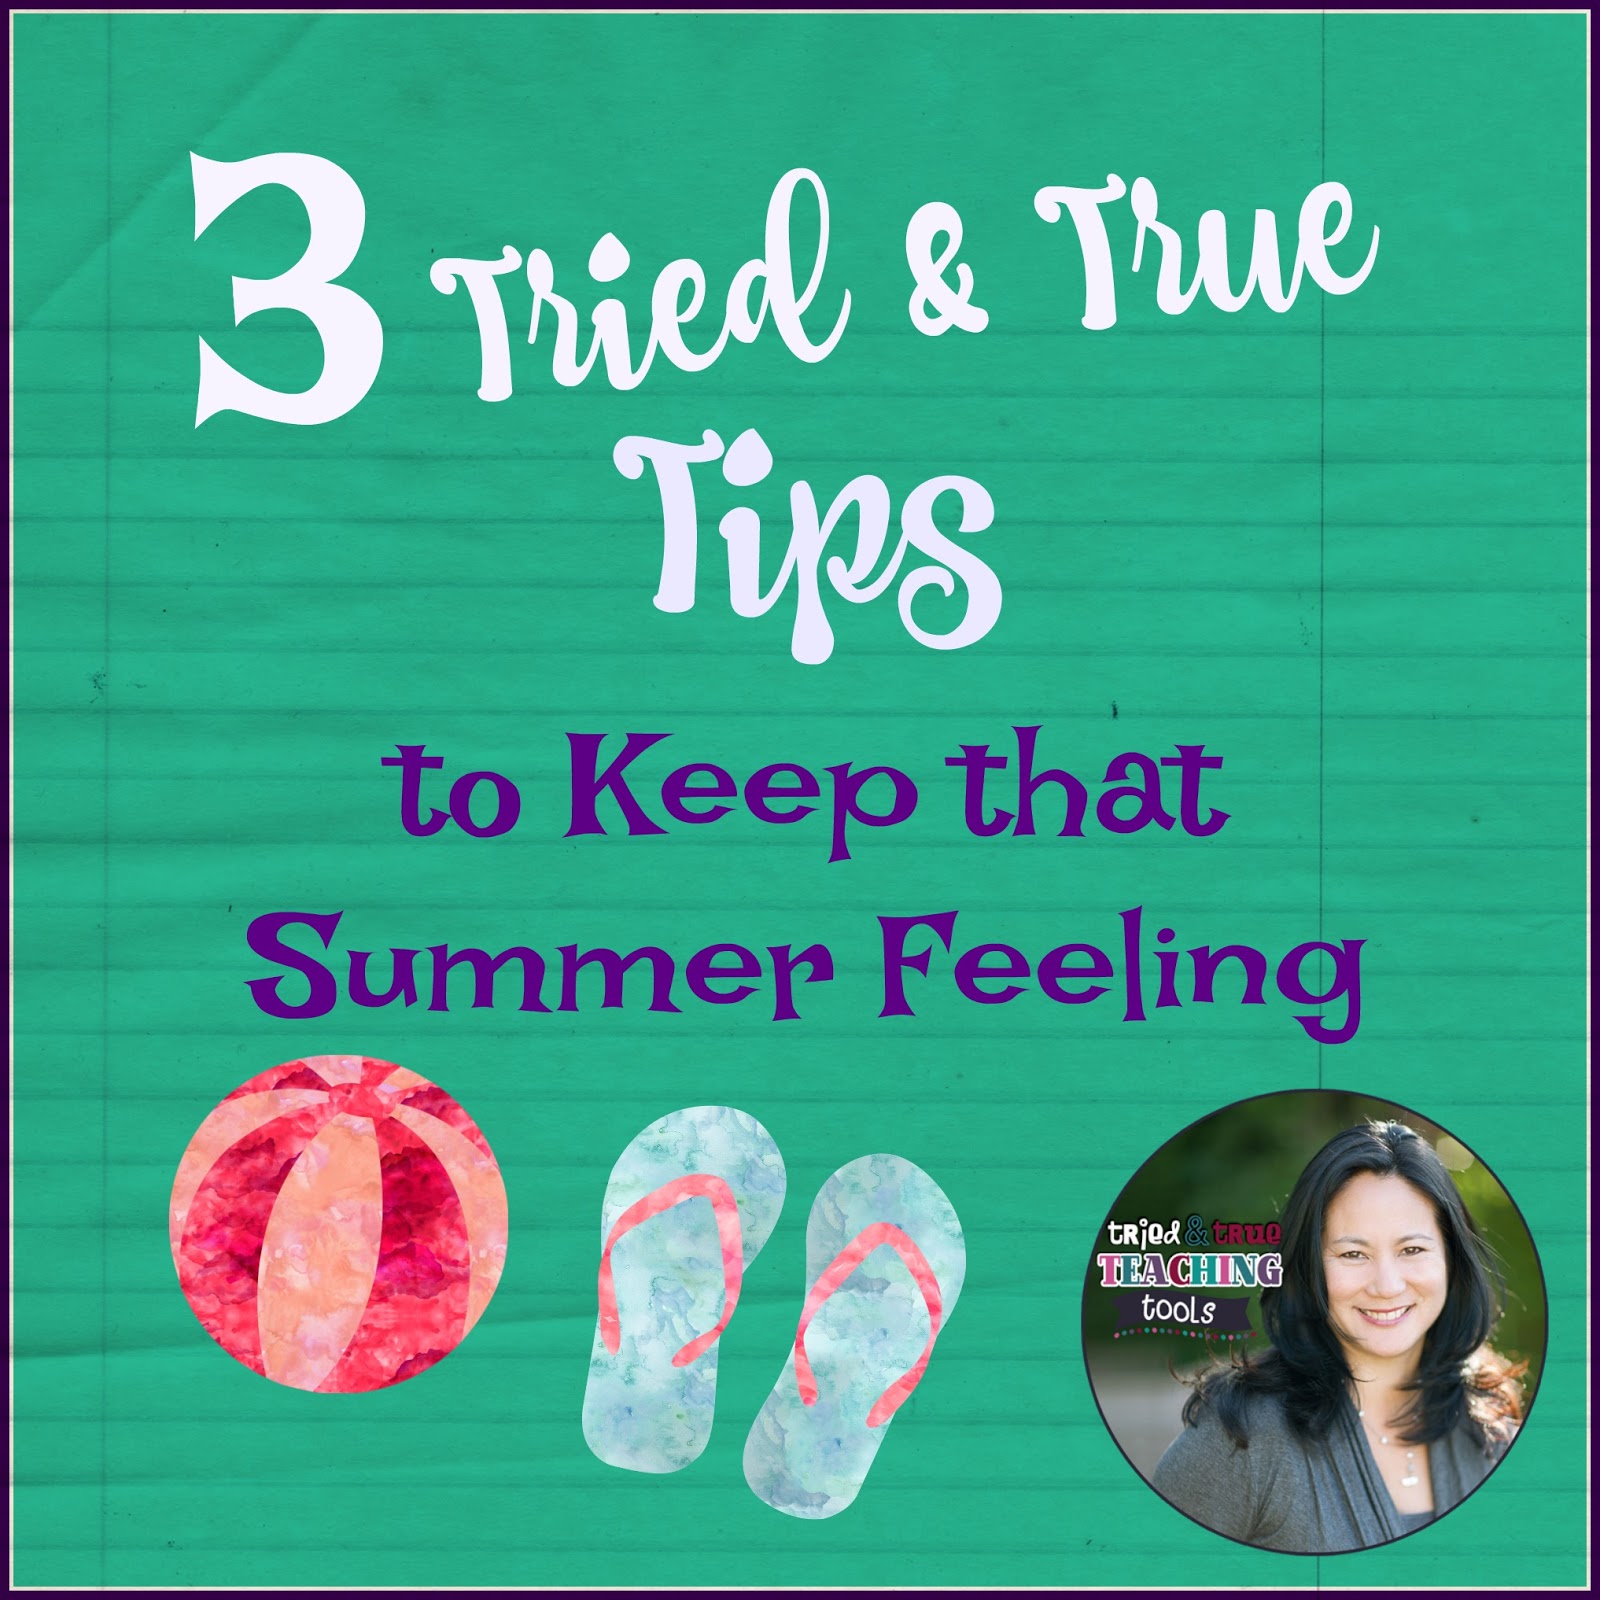 3 Tried & True Tips to Keep that Summer Feeling | <!--Can't find ...